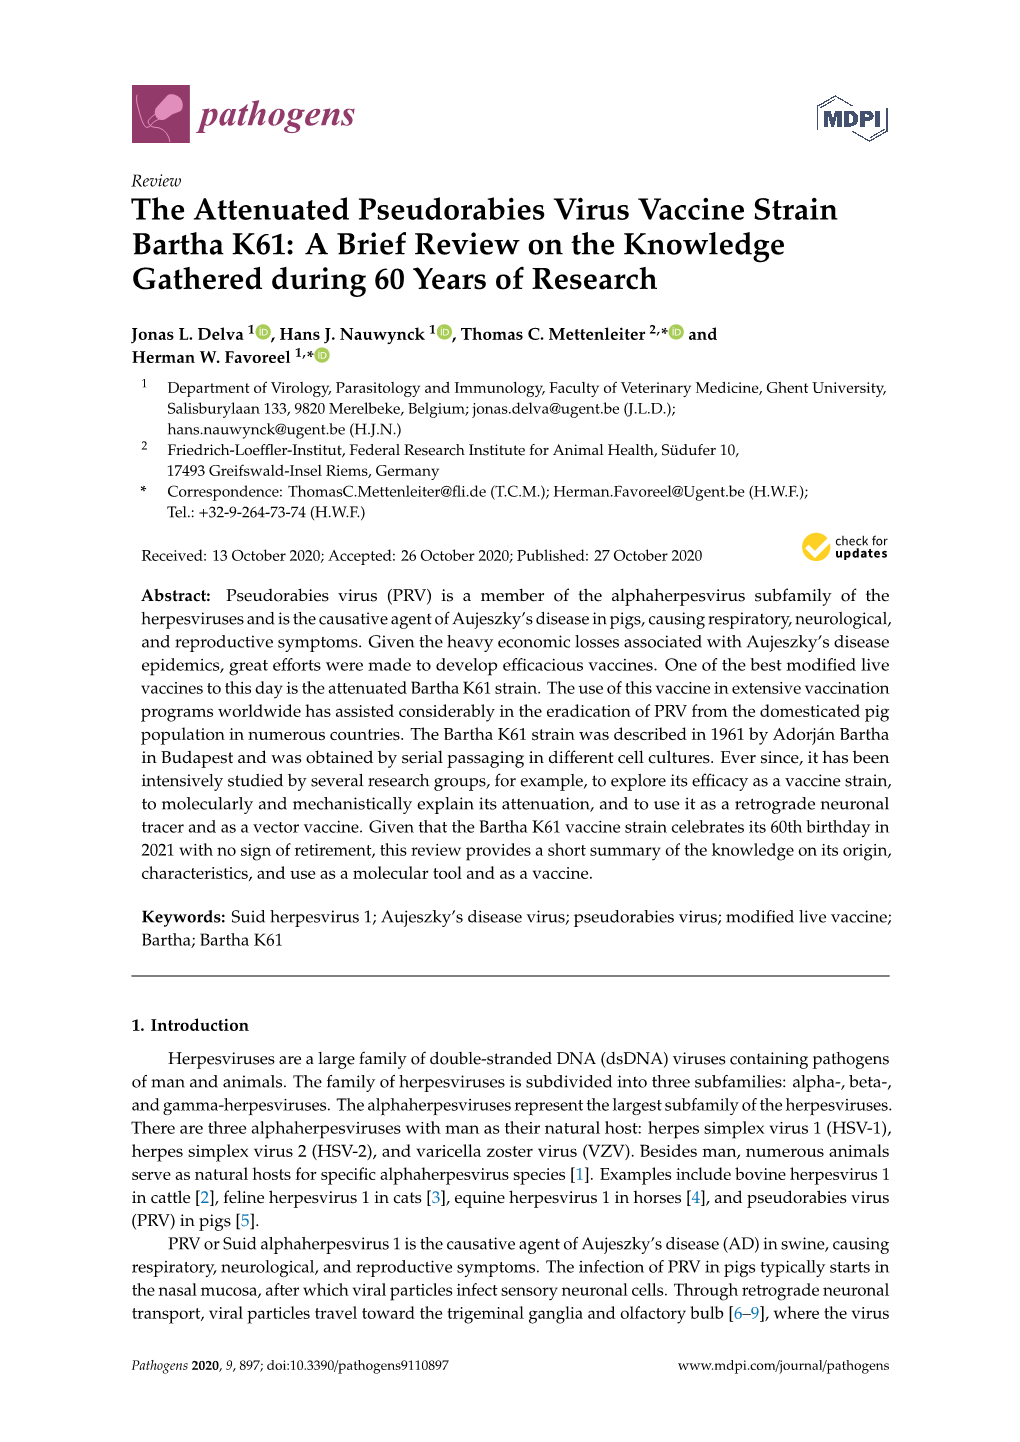 The Attenuated Pseudorabies Virus Vaccine Strain Bartha K61: a Brief Review on the Knowledge Gathered During 60 Years of Research